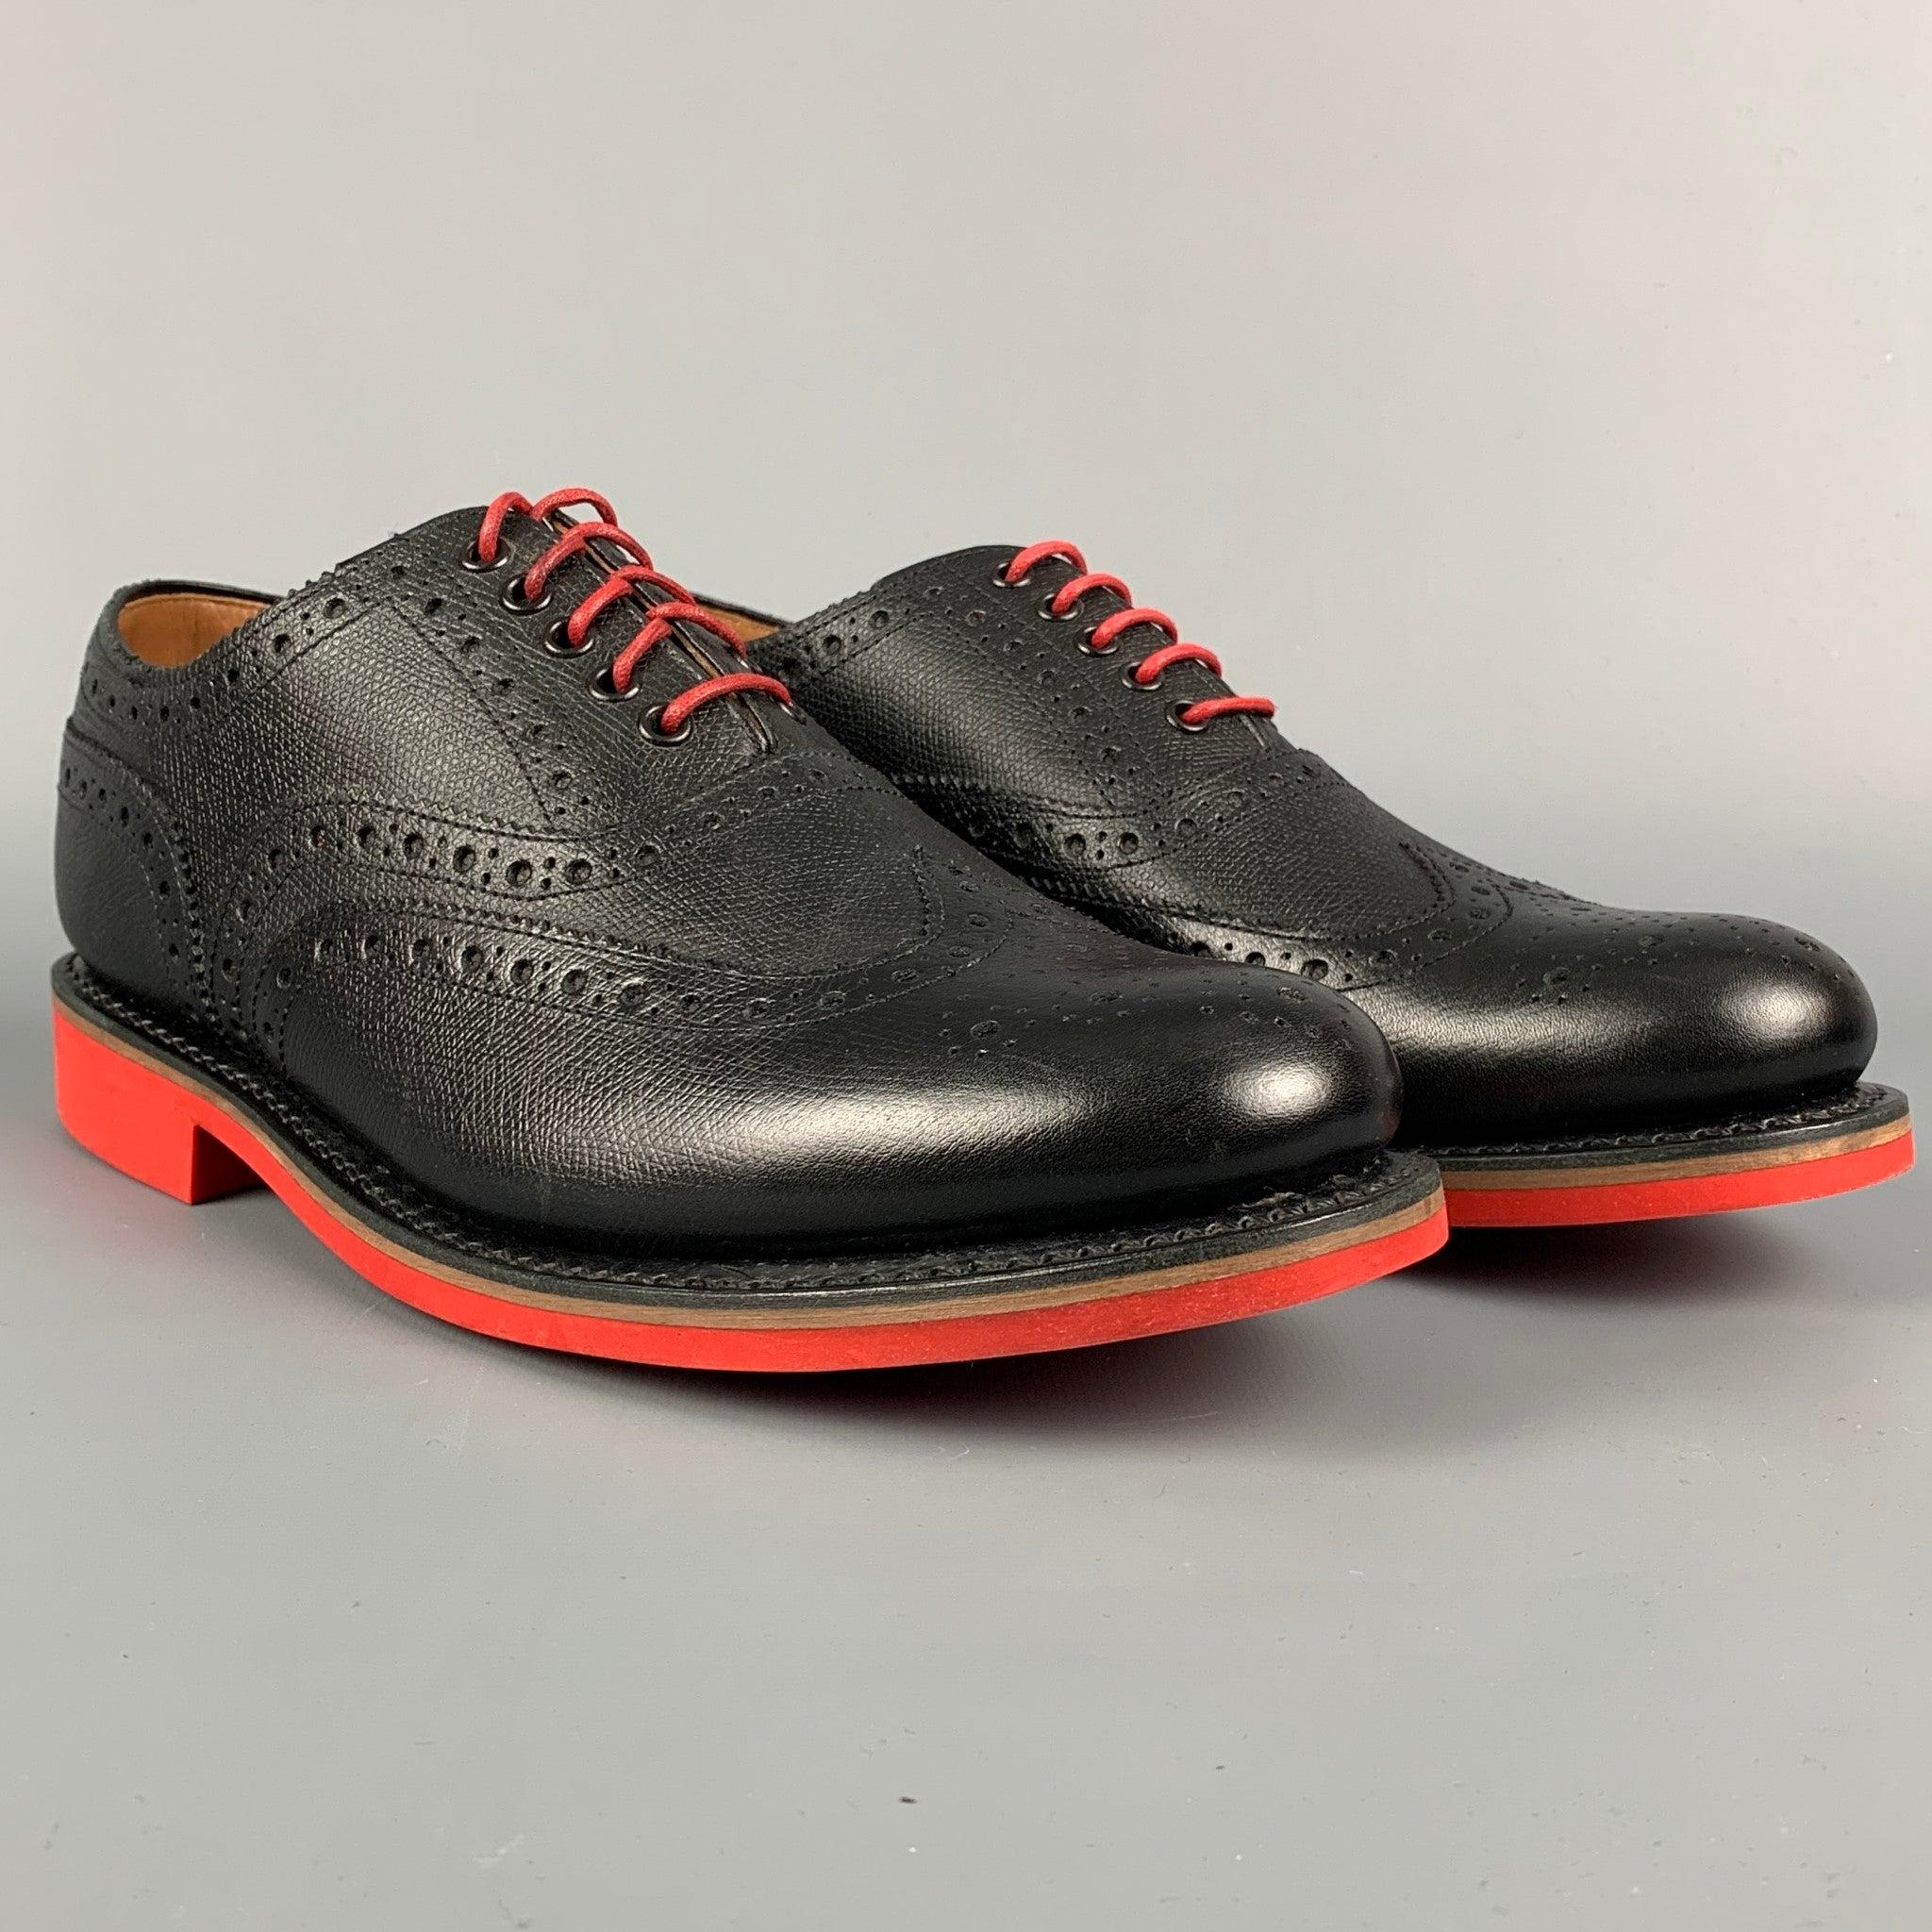 GRENSON shoes comes in a black perforated leather featuring a wingtip style, red rubber sole, and a lace up closure. Includes box.
Excellent
Pre-Owned Condition. 

Marked:   5033 450RD 8.5 G Outsole: 11.5 inches  x 4 inches 
  
  
 
Reference: